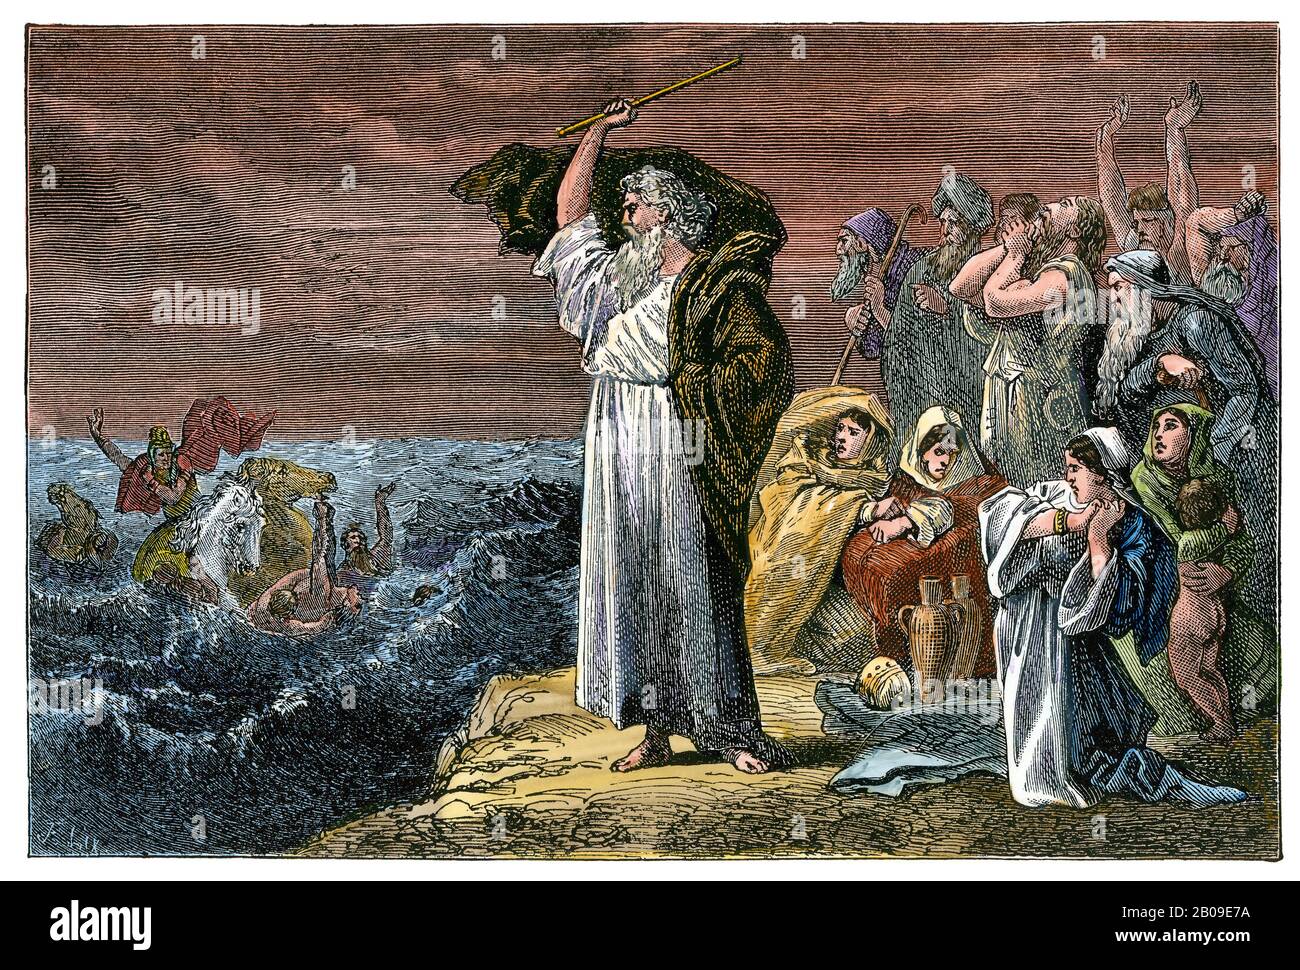 Moses watching the Red Sea destroy pharaoh's army, allowing the Hebrews to escape Egypt. Hand-colored woodcut Stock Photo